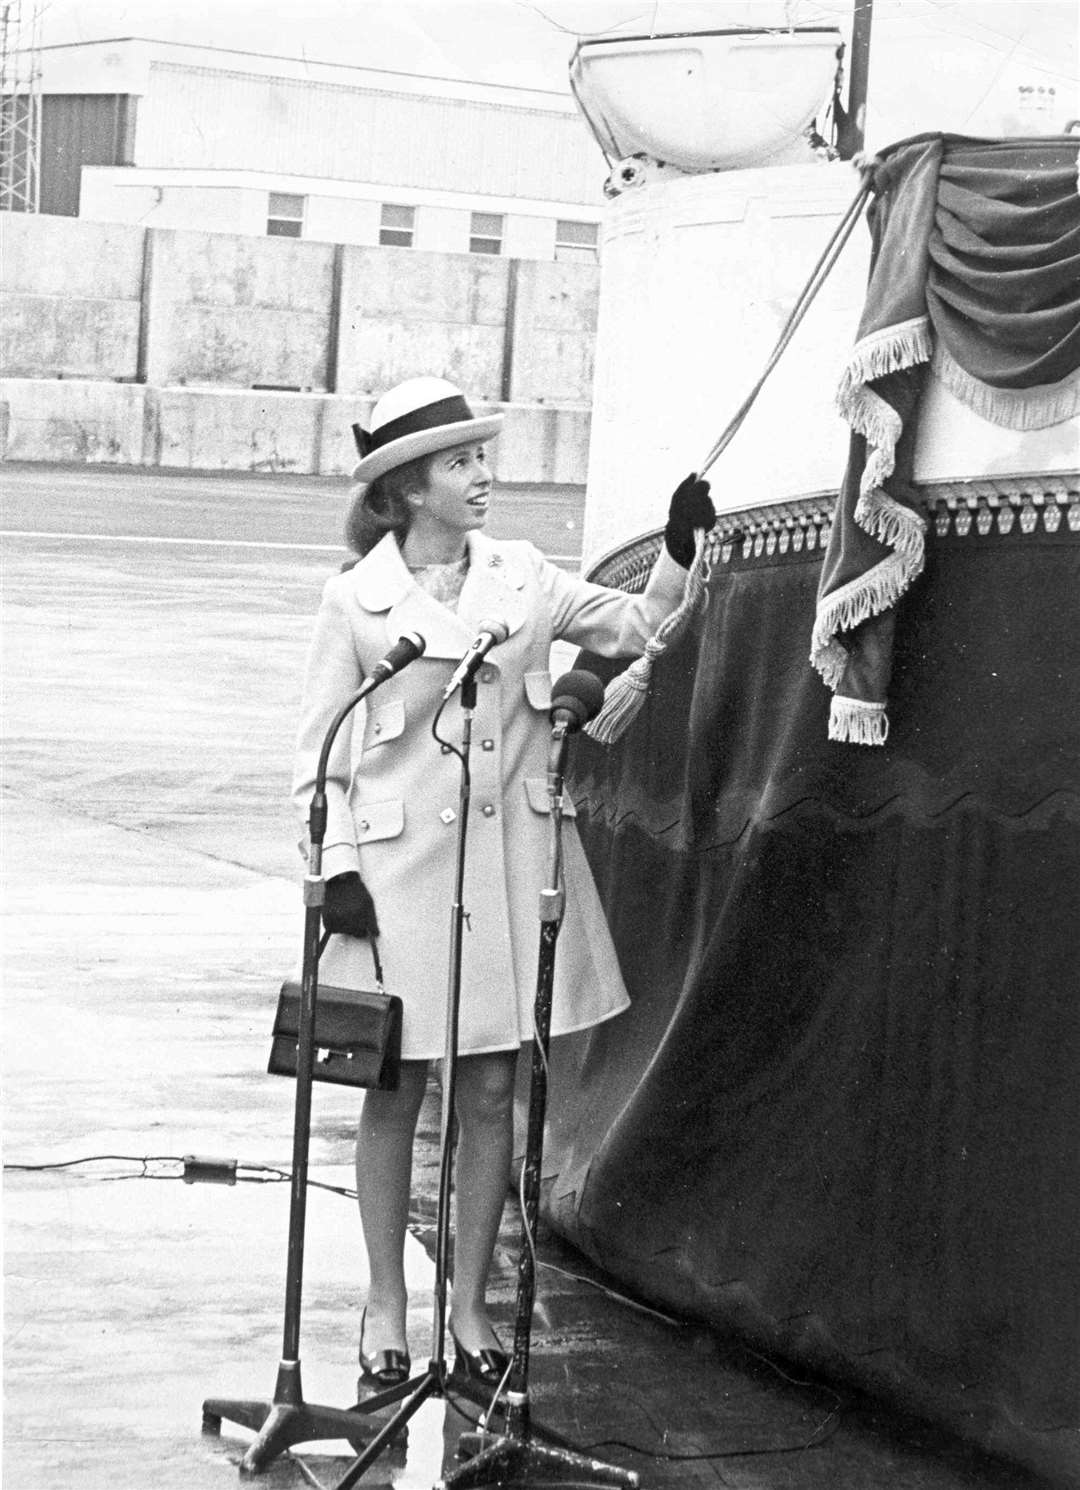 Princess Anne named the second of British Rail's Seaspeed hovercraft after herself at Dover in October 1969. She unveiled a nameplate, signed a portrait of herself inside the terminal building and then took a 30-minute trip on the hovercraft to the Goodwin Sands and back